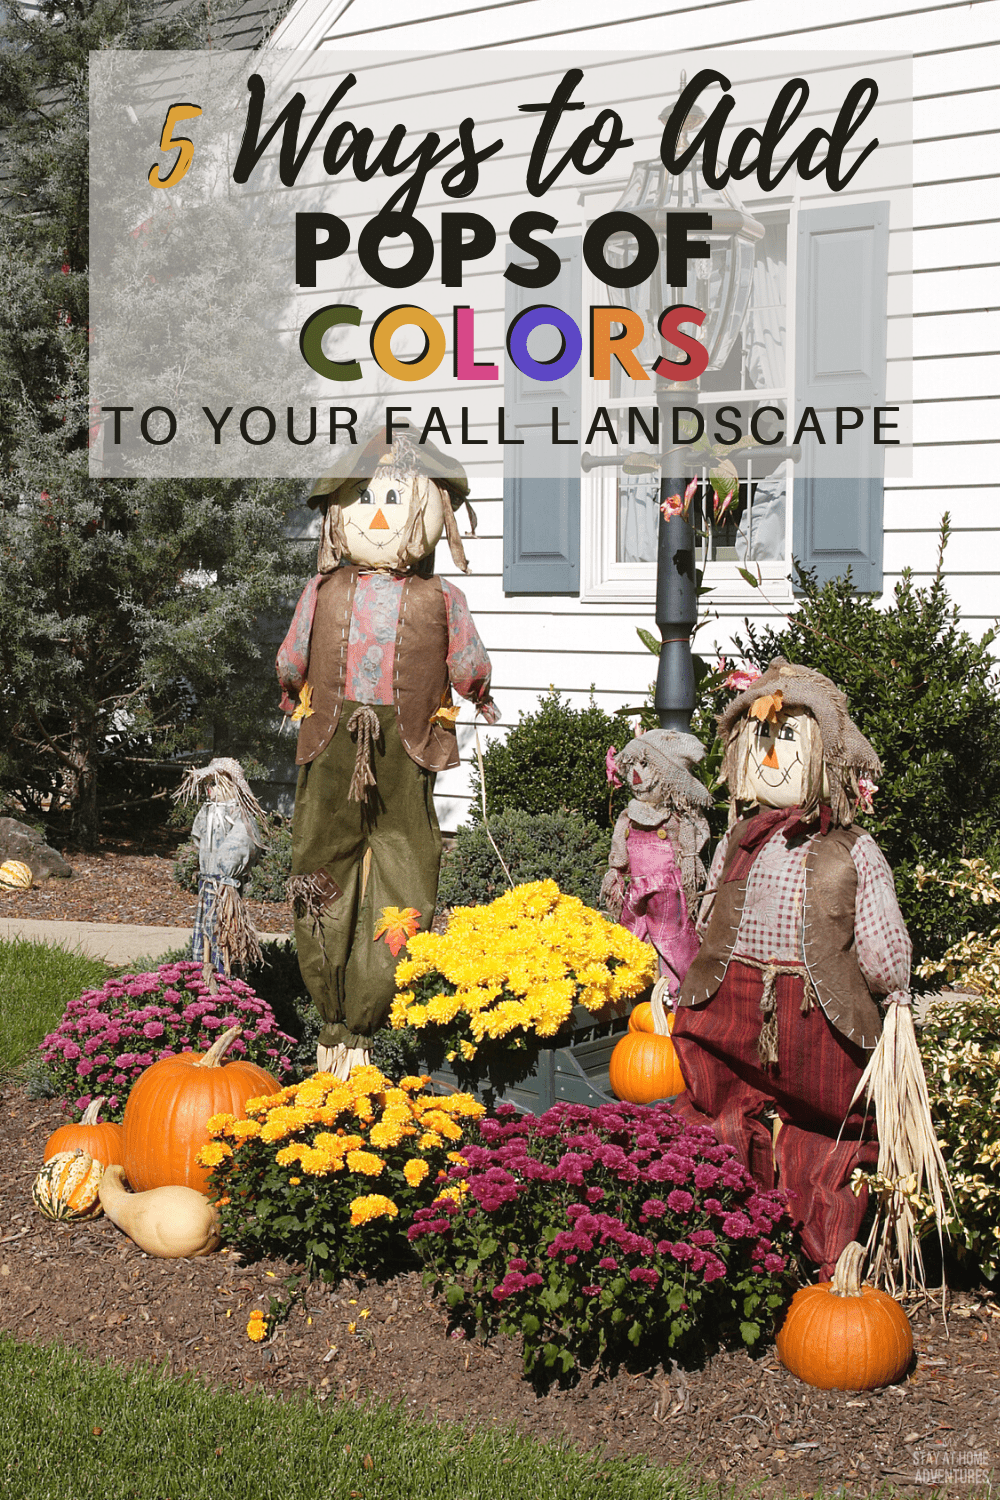 Fall landscaping doesn’t have to be drab and boring. As the seasons change, you can add flowers and decorative elements to make your landscaping really pop. #landscape #frontyard #fall via @mystayathome